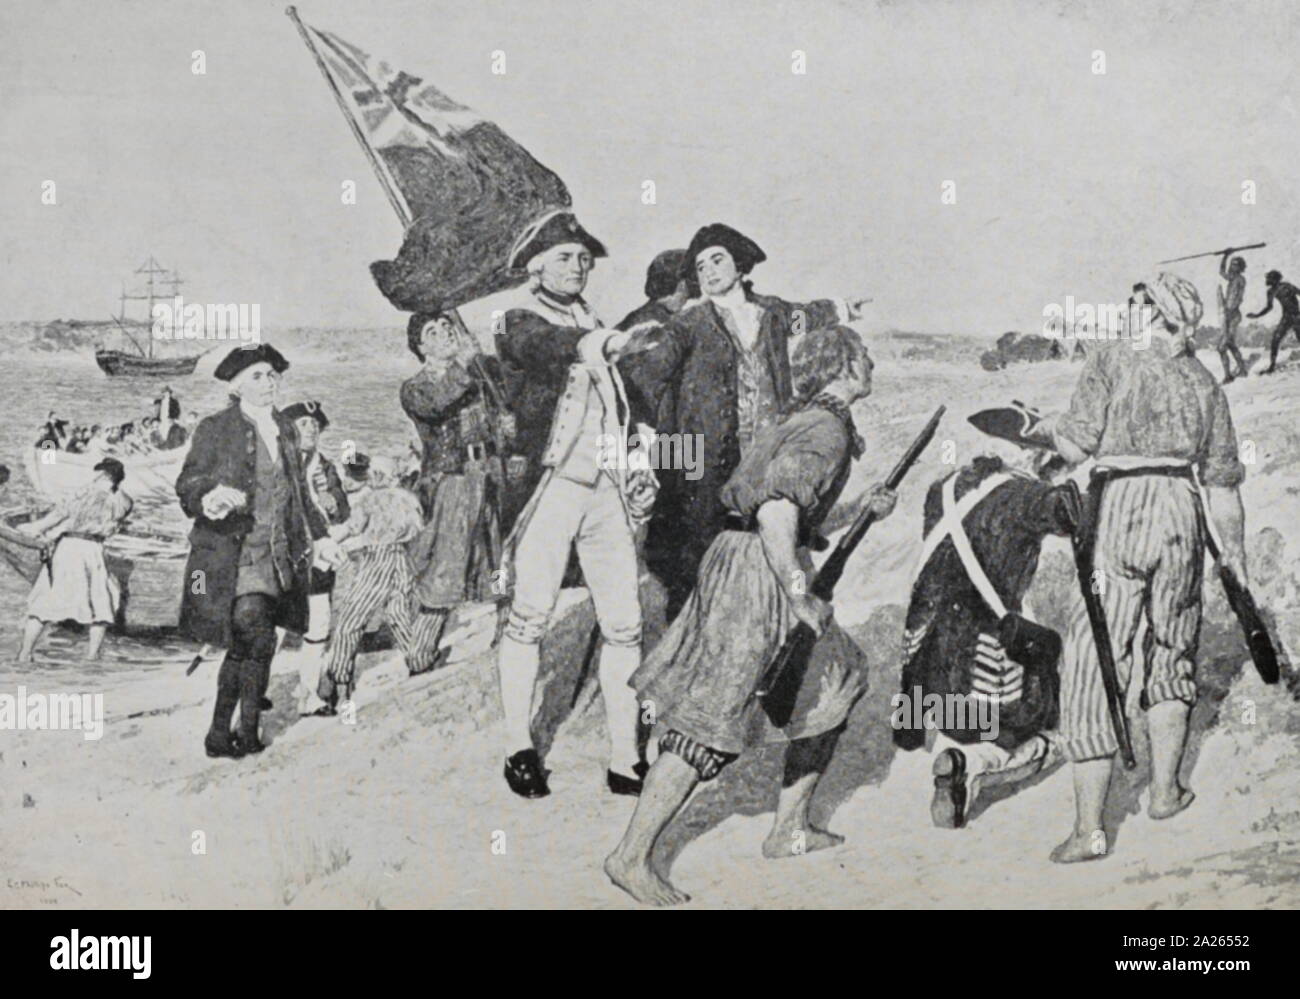 On 29 April 1770, Botany Bay was the site of James Cook's first landing of HMS Endeavour on the land mass of Australia, after his extensive navigation of New Zealand. Later the British planned Botany Bay as the site for a penal colony Stock Photo